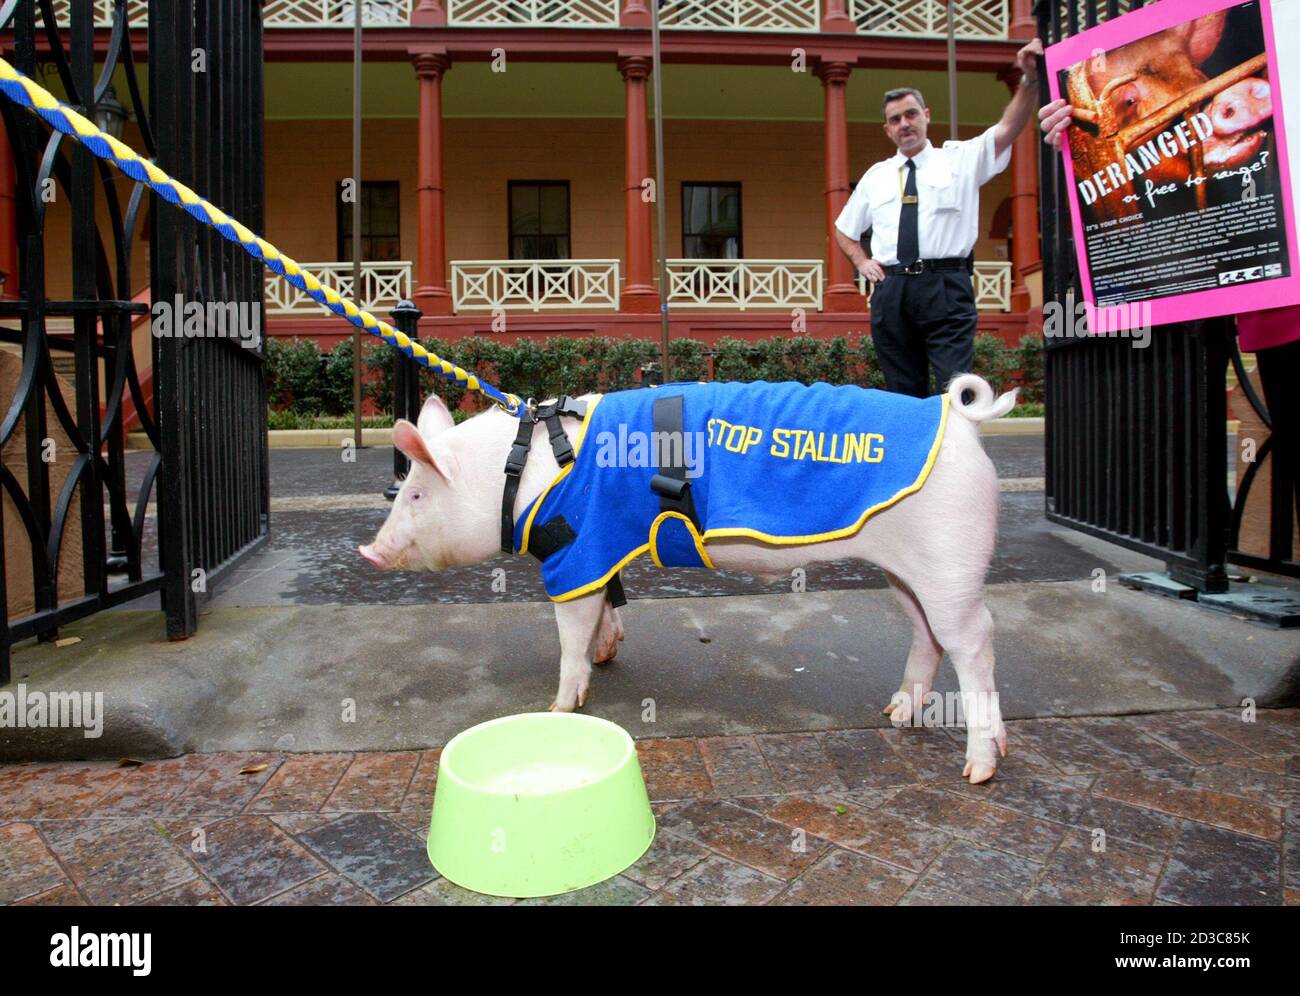 A New South Wales Parliament House security guard (R) keeps an eye on Edgar the pig, star of the film 'Babe', during a protest outside the seat of government in Sydney July 22, 2003. Edgar was a show piece in a demonstration by BOAR (Ballarat Organisation for Animal Rights) in a bid to draw attention to what the group claim is cruel treatment methods of farming pigs where sows are kept in stalls that do not allow the animal to move or interact normally. Sow stalls have been banned or phased out in the United Kingdom, Florida, the European Union and New Zealand. REUTERS/Will Burgess  WB/PB Stock Photo